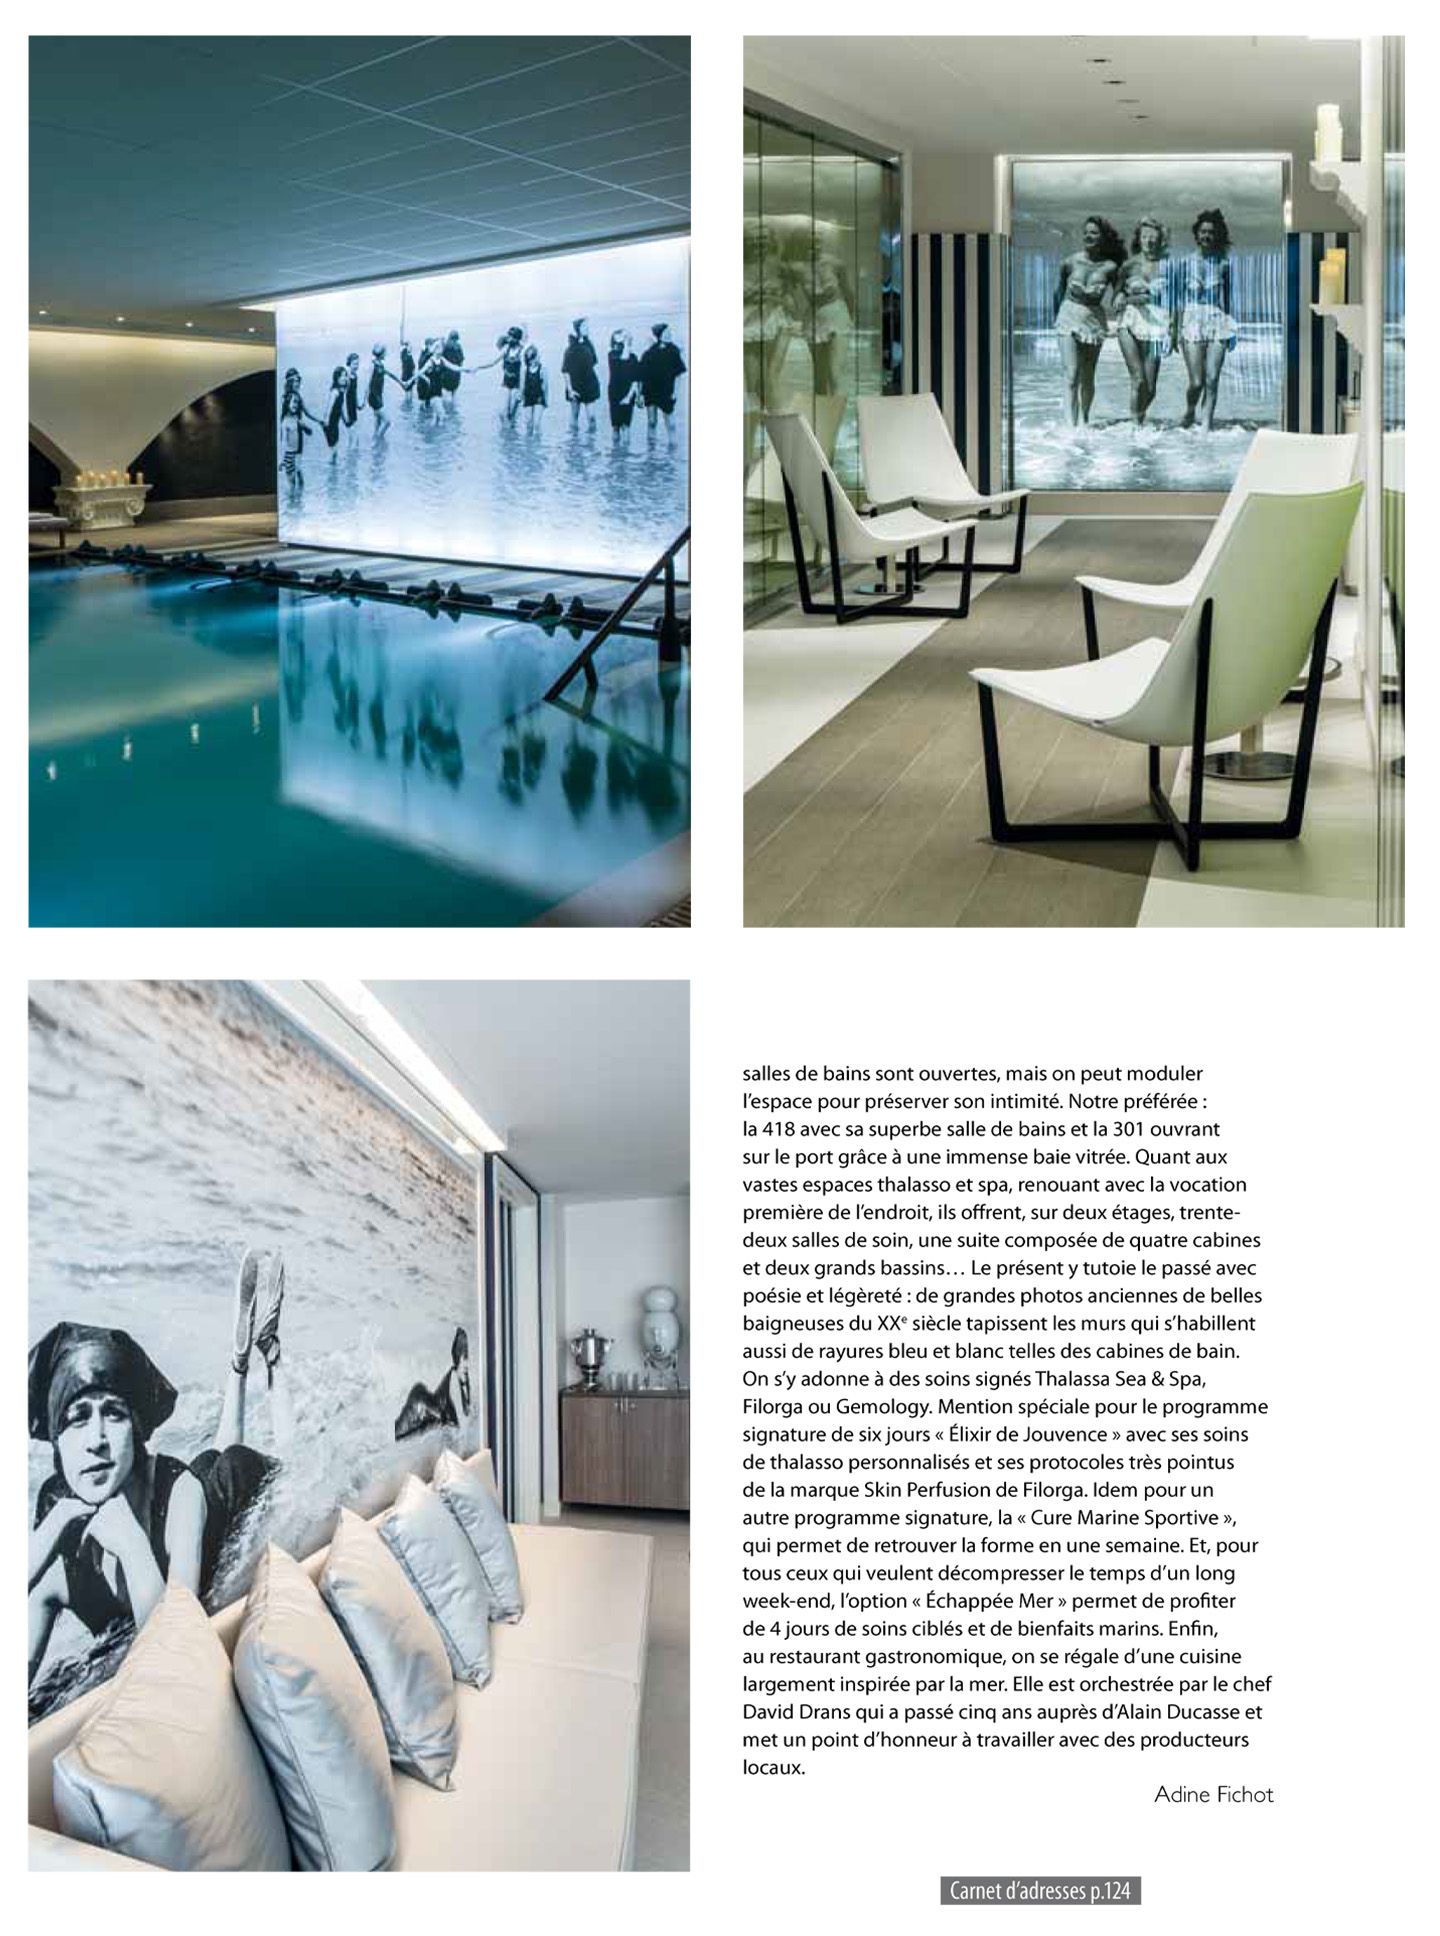 article on the marine cures of trouville in the magazine voyage de luxe, 5 star luxury hotel thalasso and spa by the interior design studio jean-philippe nuel